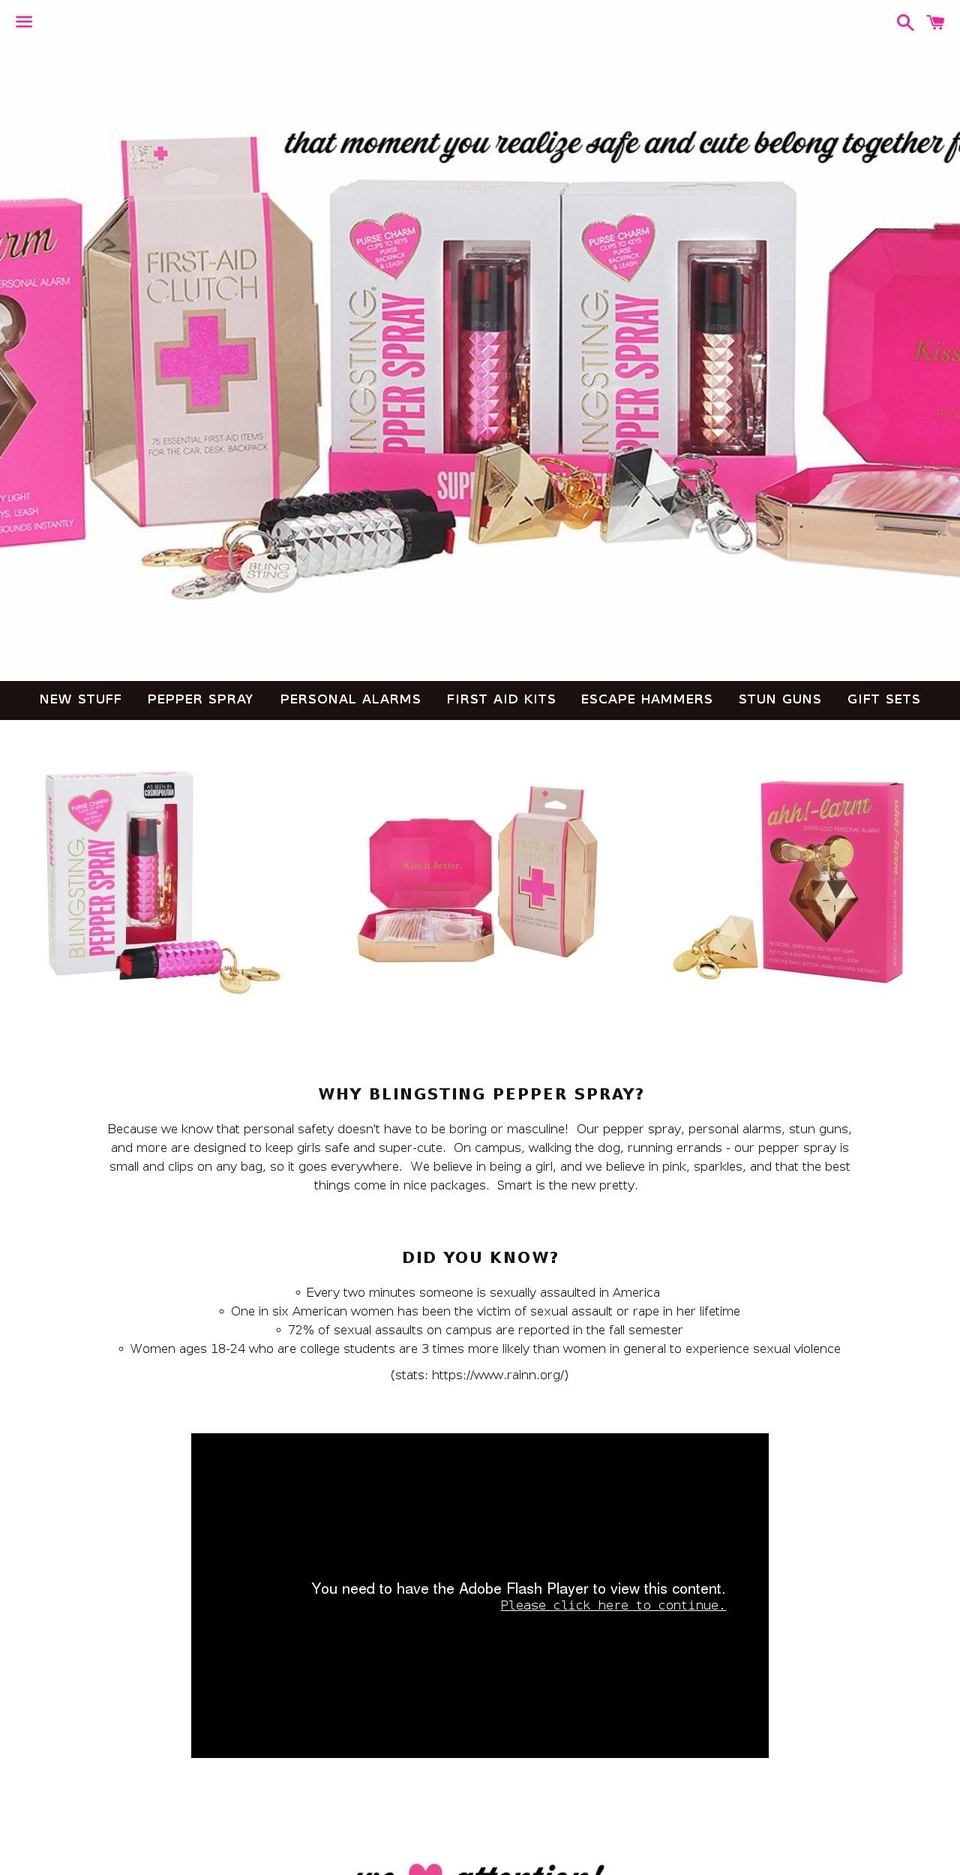 Galleria Shopify theme site example blingsting.com